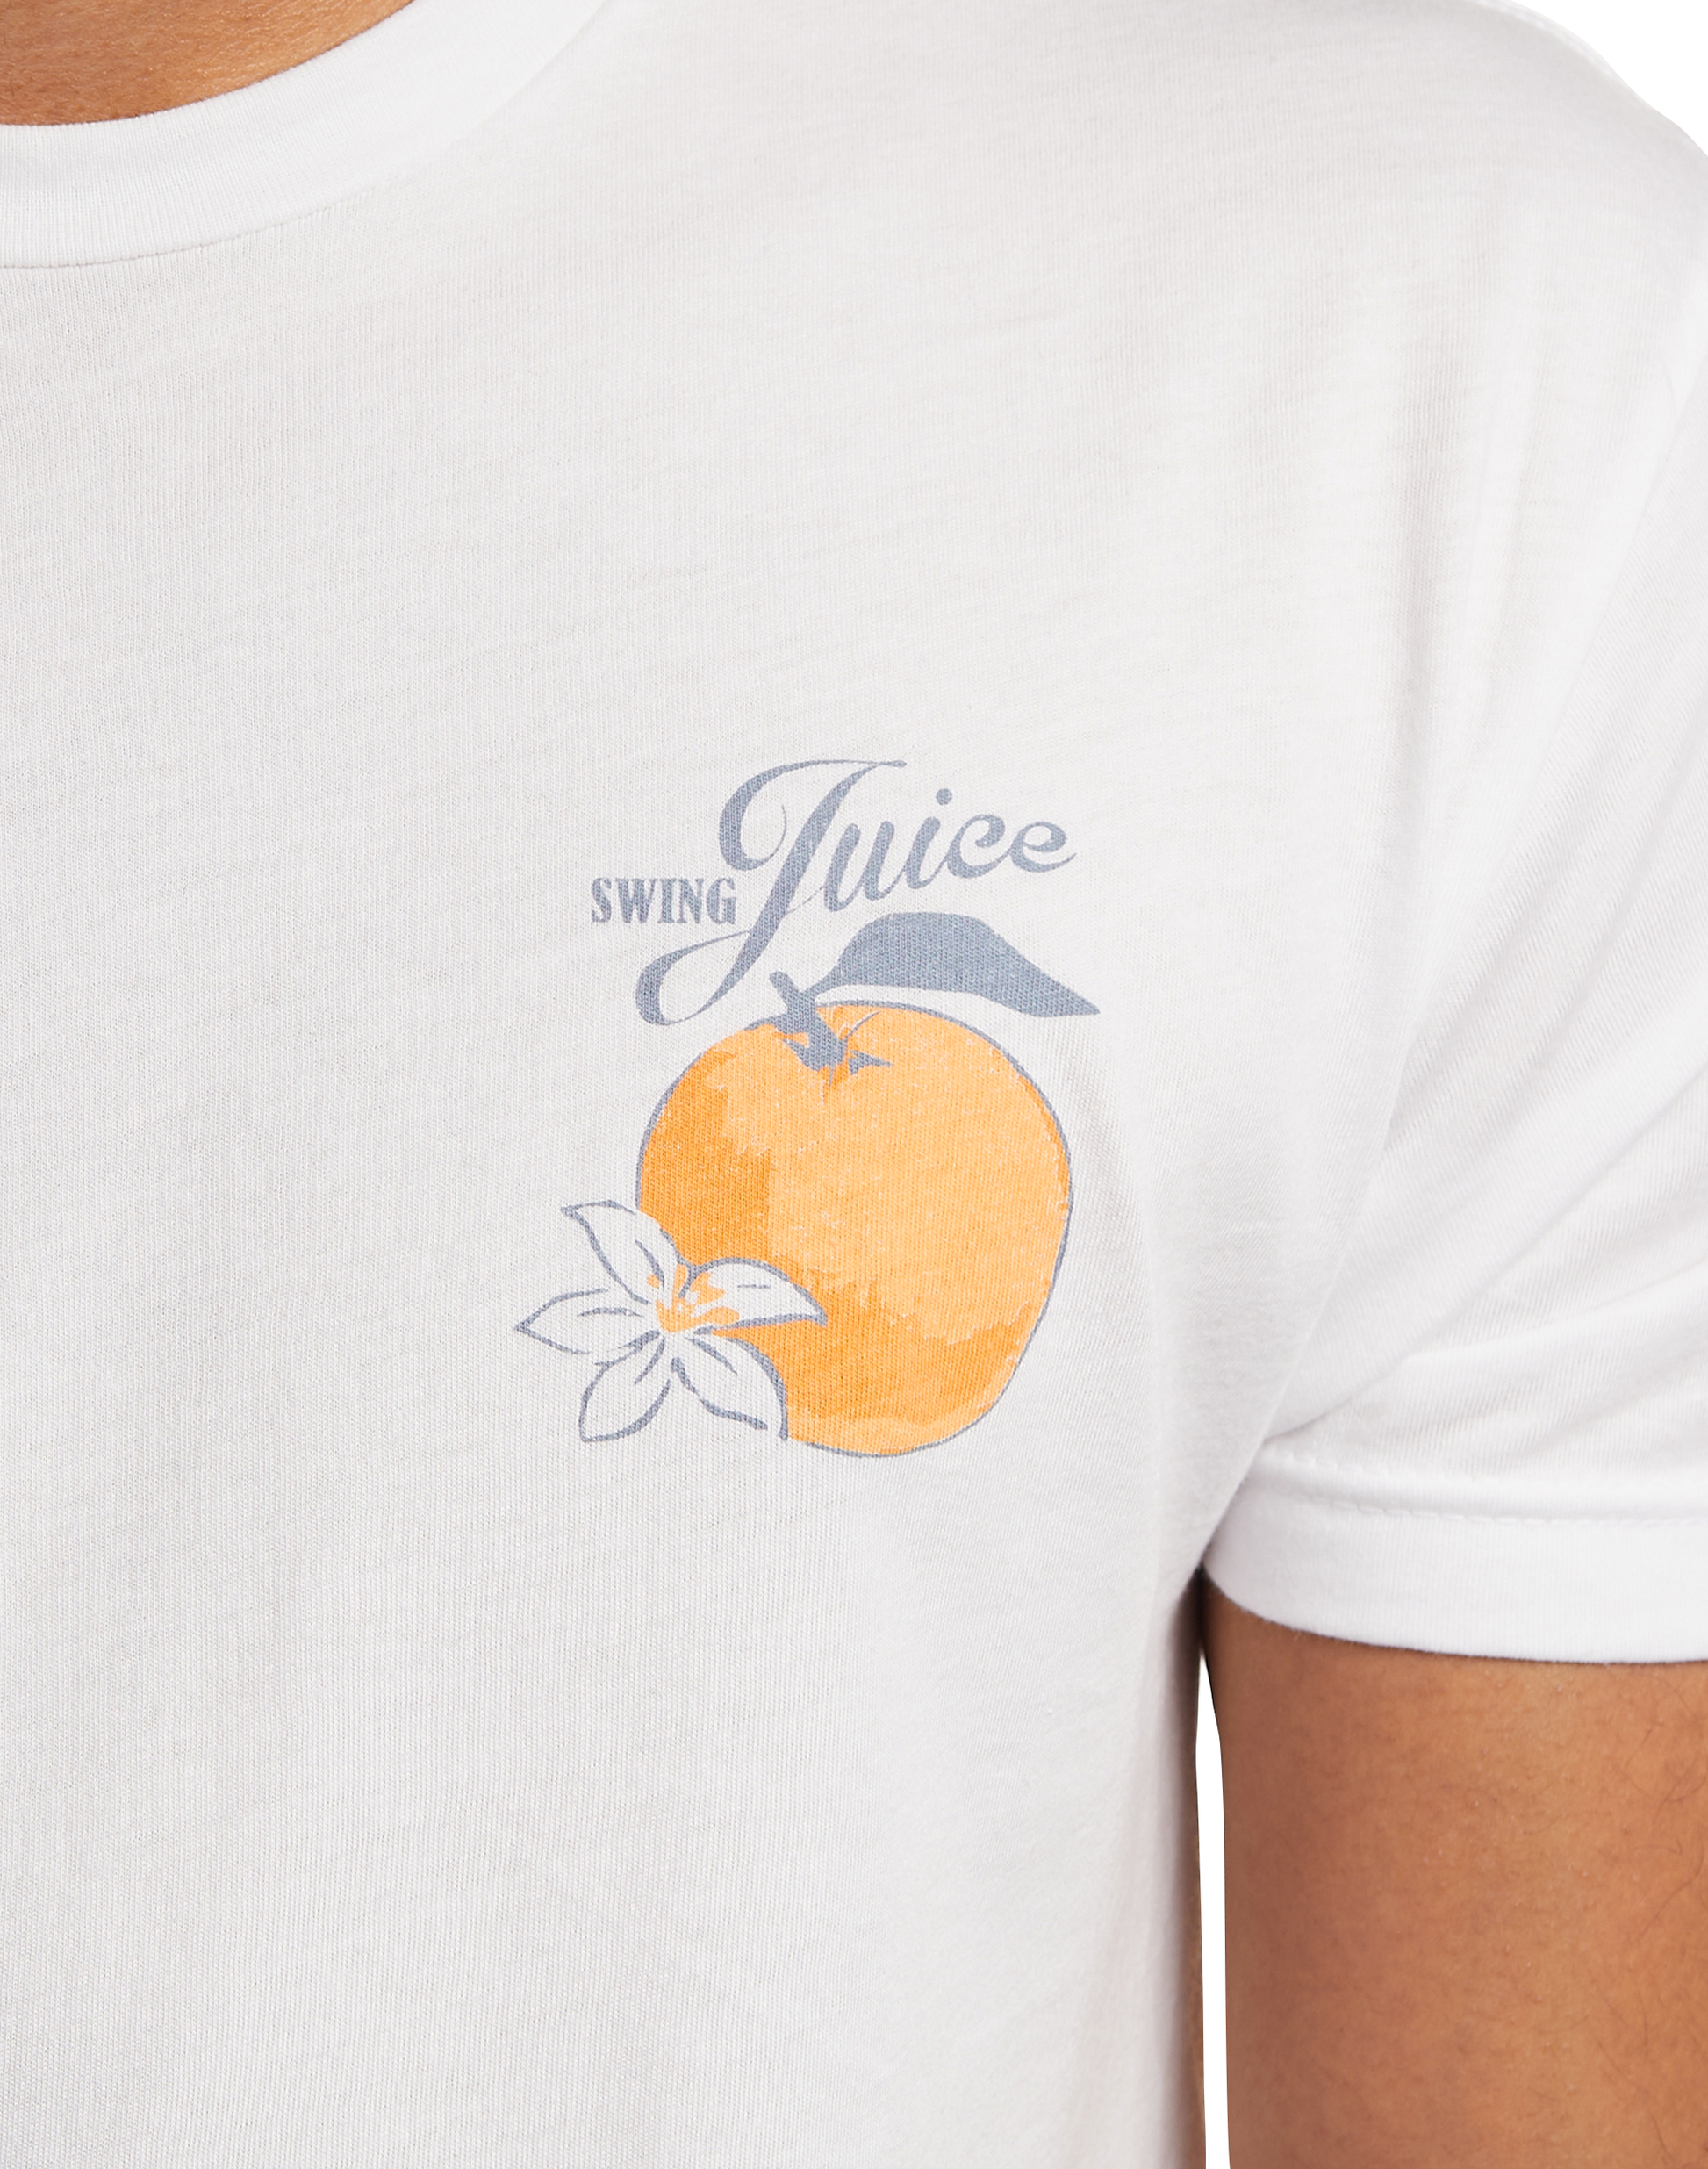 Golf Squeeze Some SwingJuice Unisex T-Shirt-White